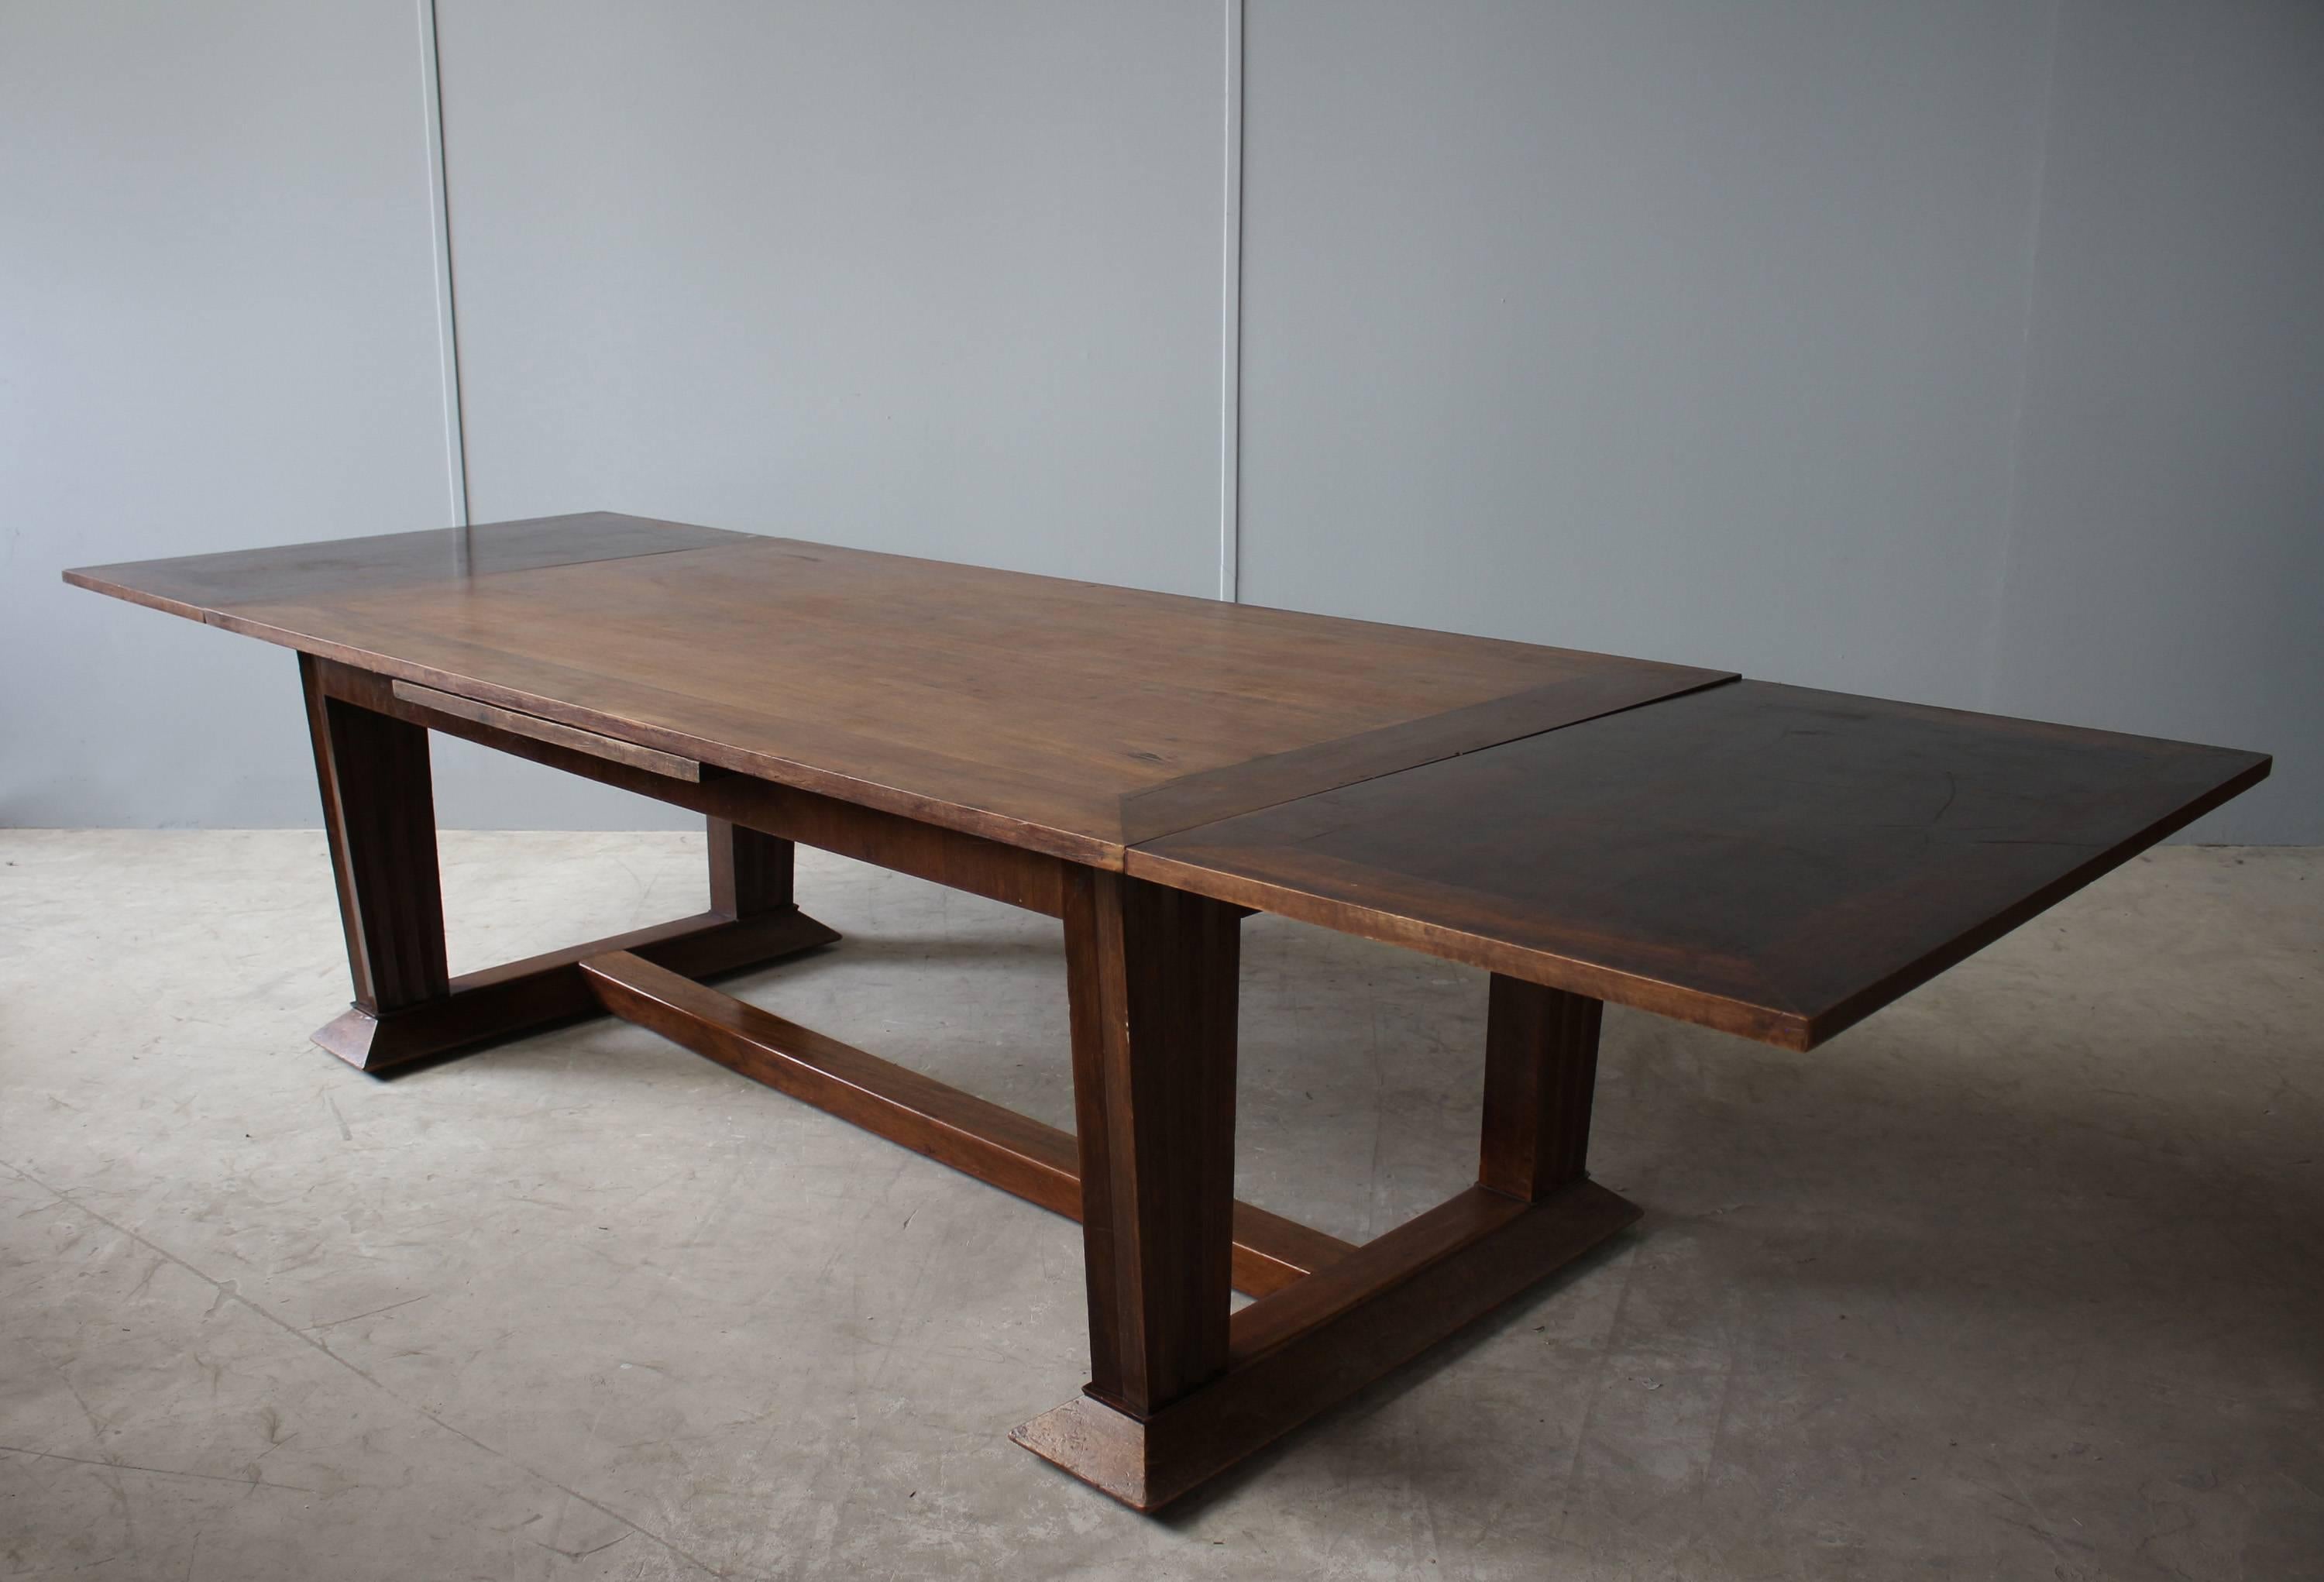 Rare Fine French Art Deco Walnut Dining Table by Jean-Charles Moreux 1